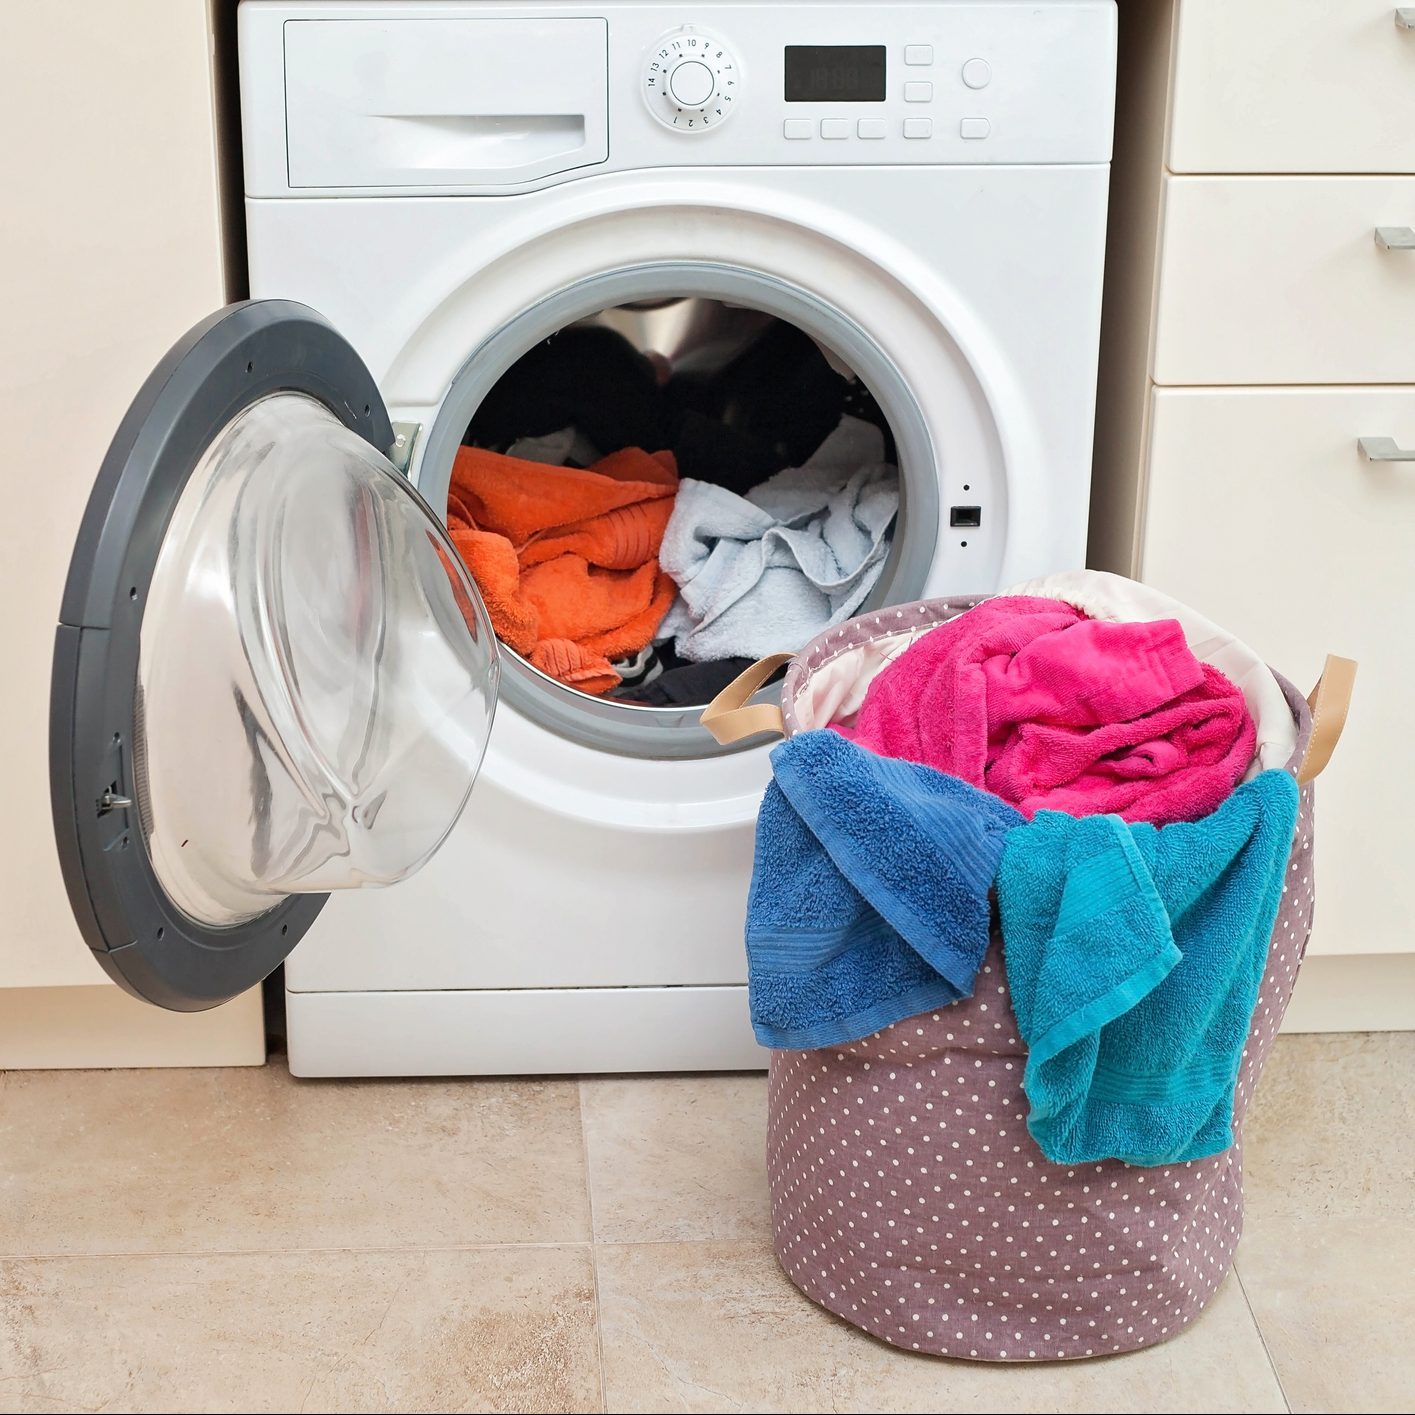 Why Is Your Dryer Not Drying Clothes?